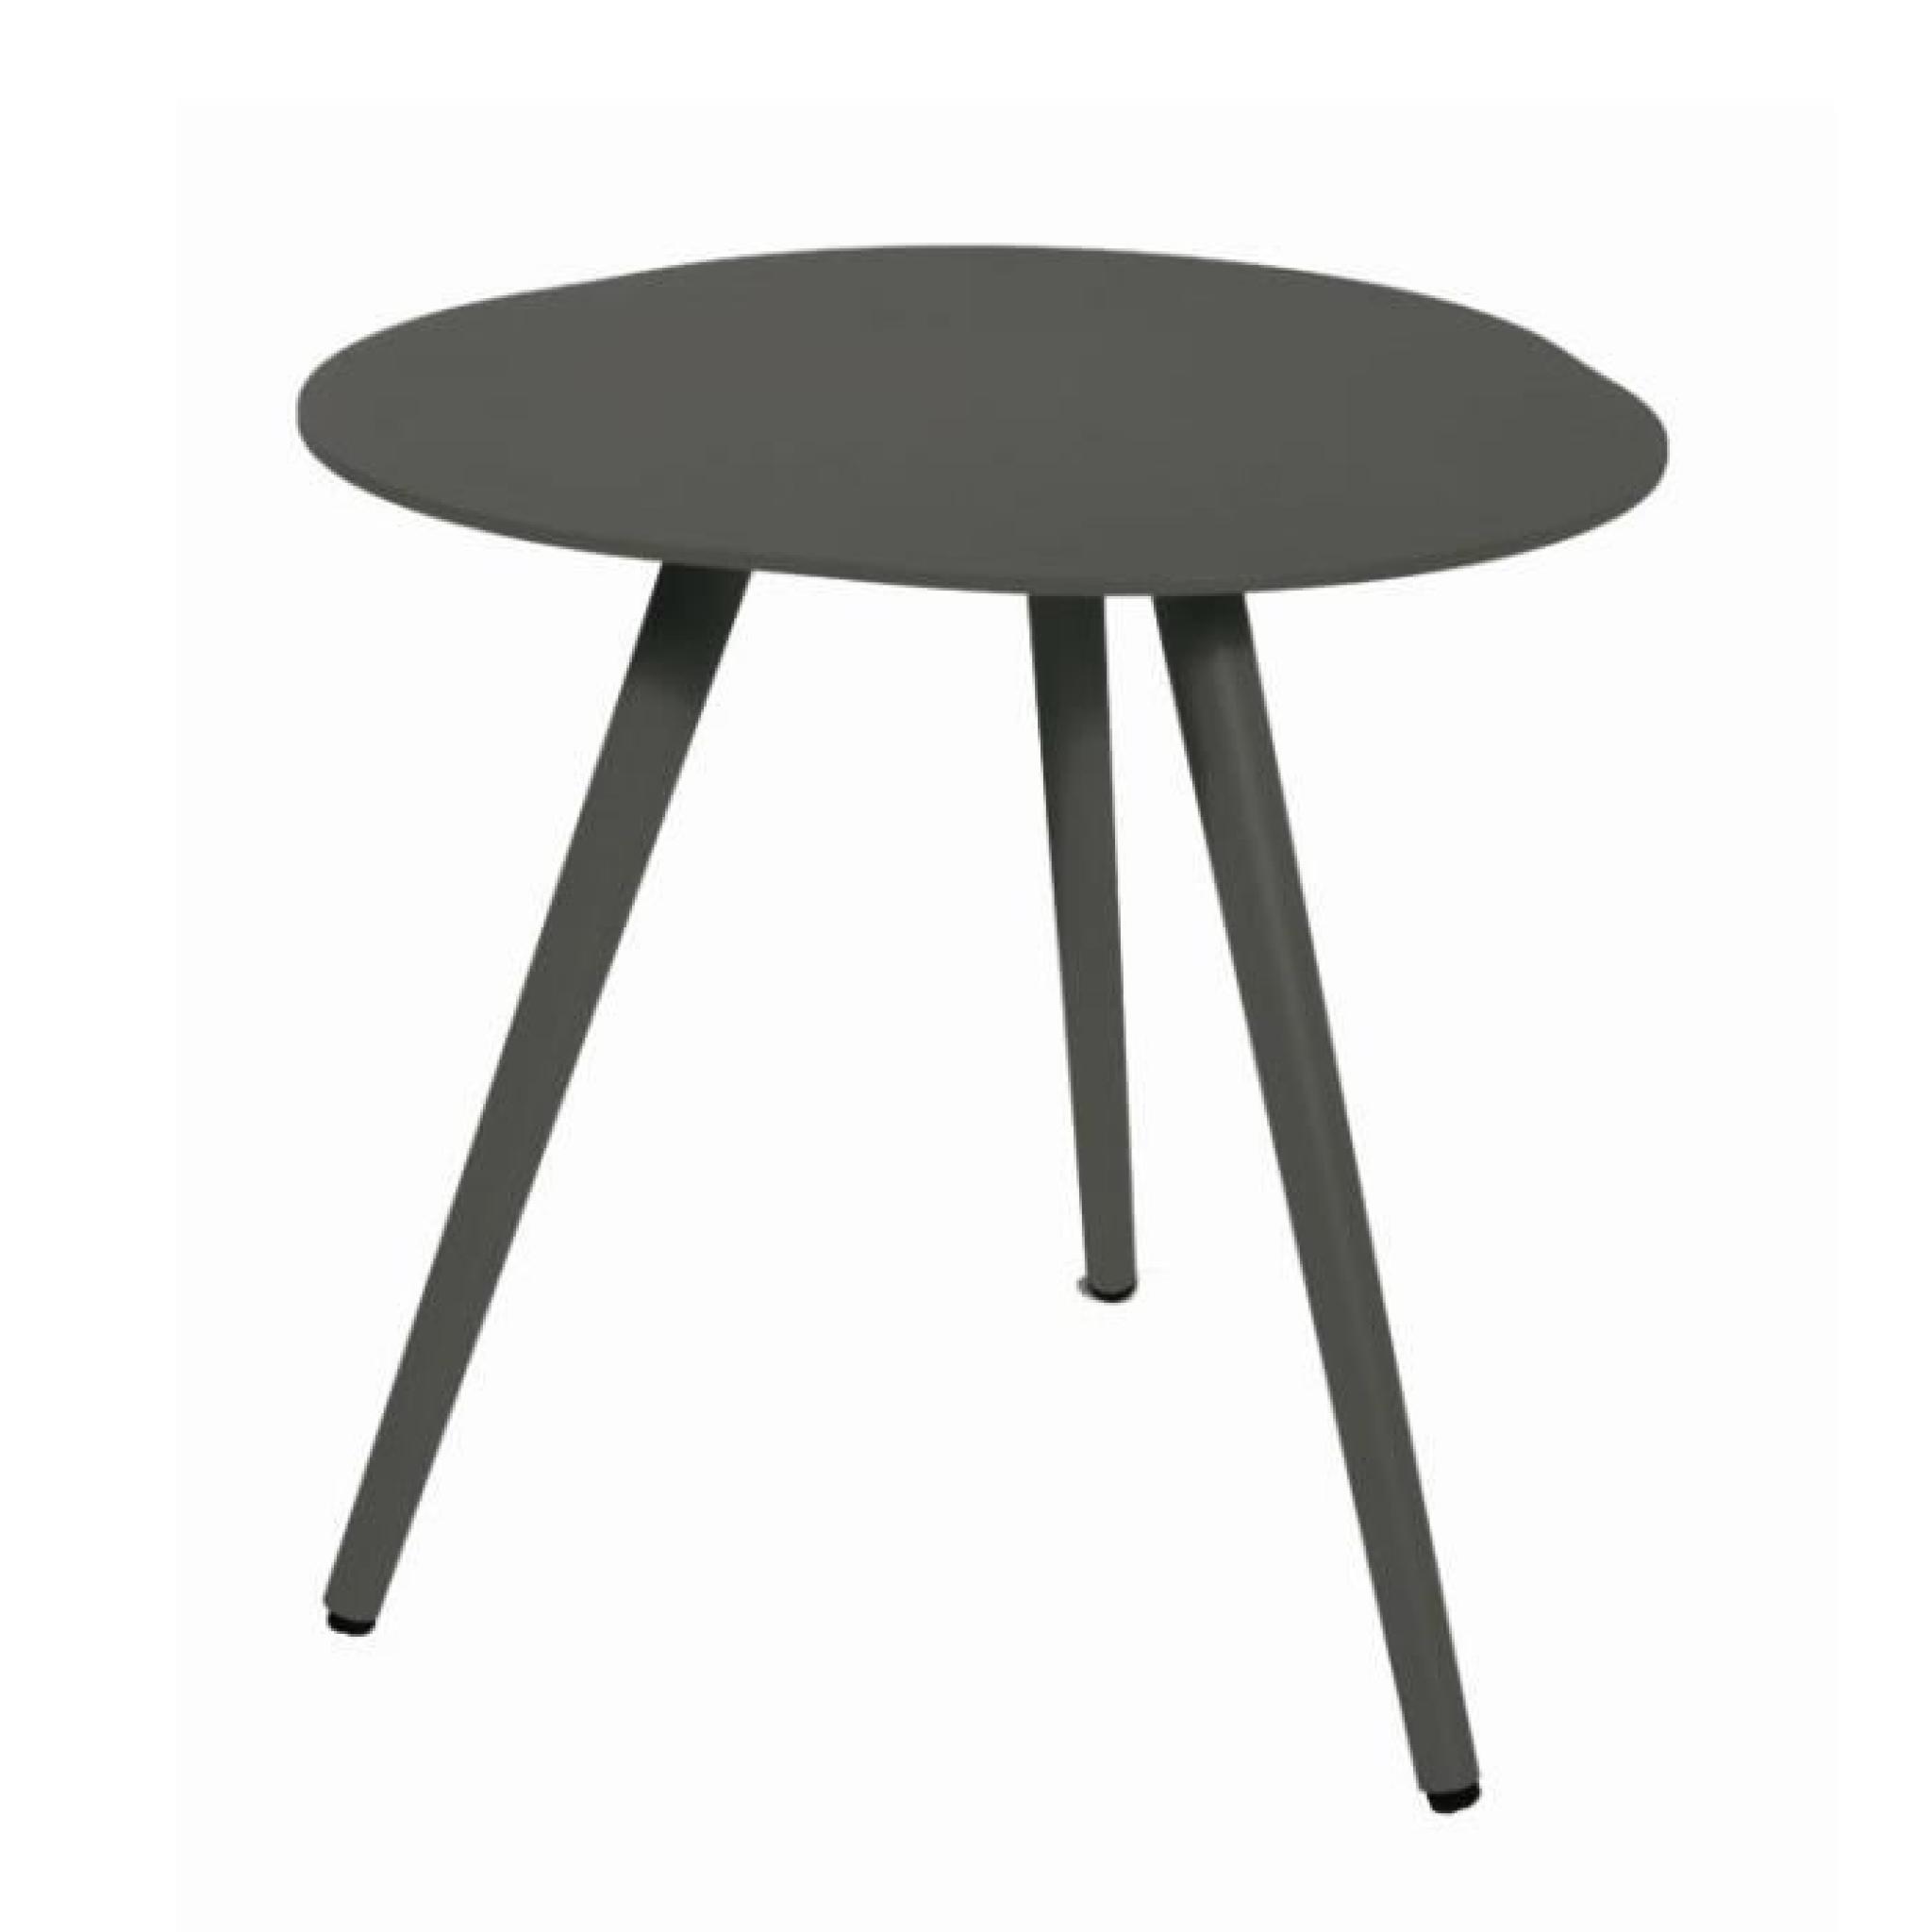 Table d'appoint en alu anthracite Spezia Anthracite